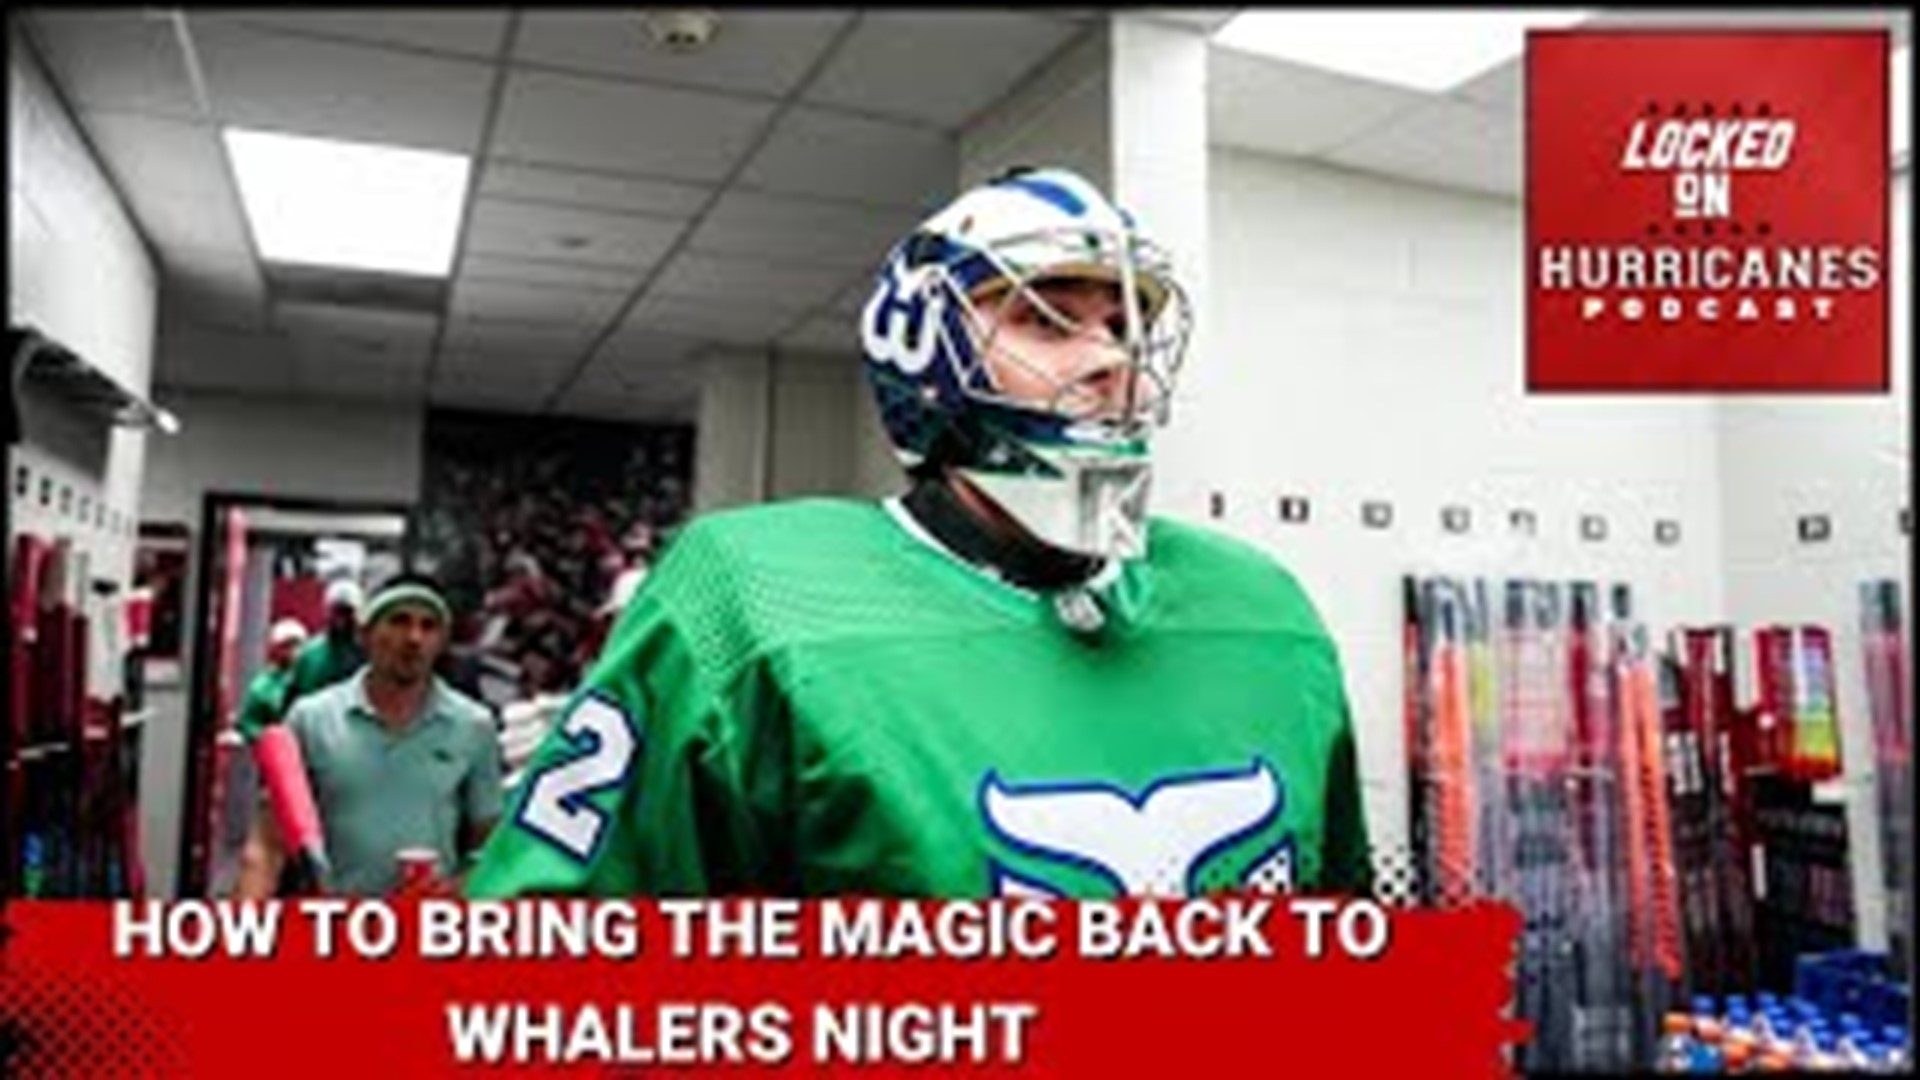 While fun at first, many fans are starting to feel that Whalers Night is now just another night on the calendar.  What can the Canes do to spice it up again?